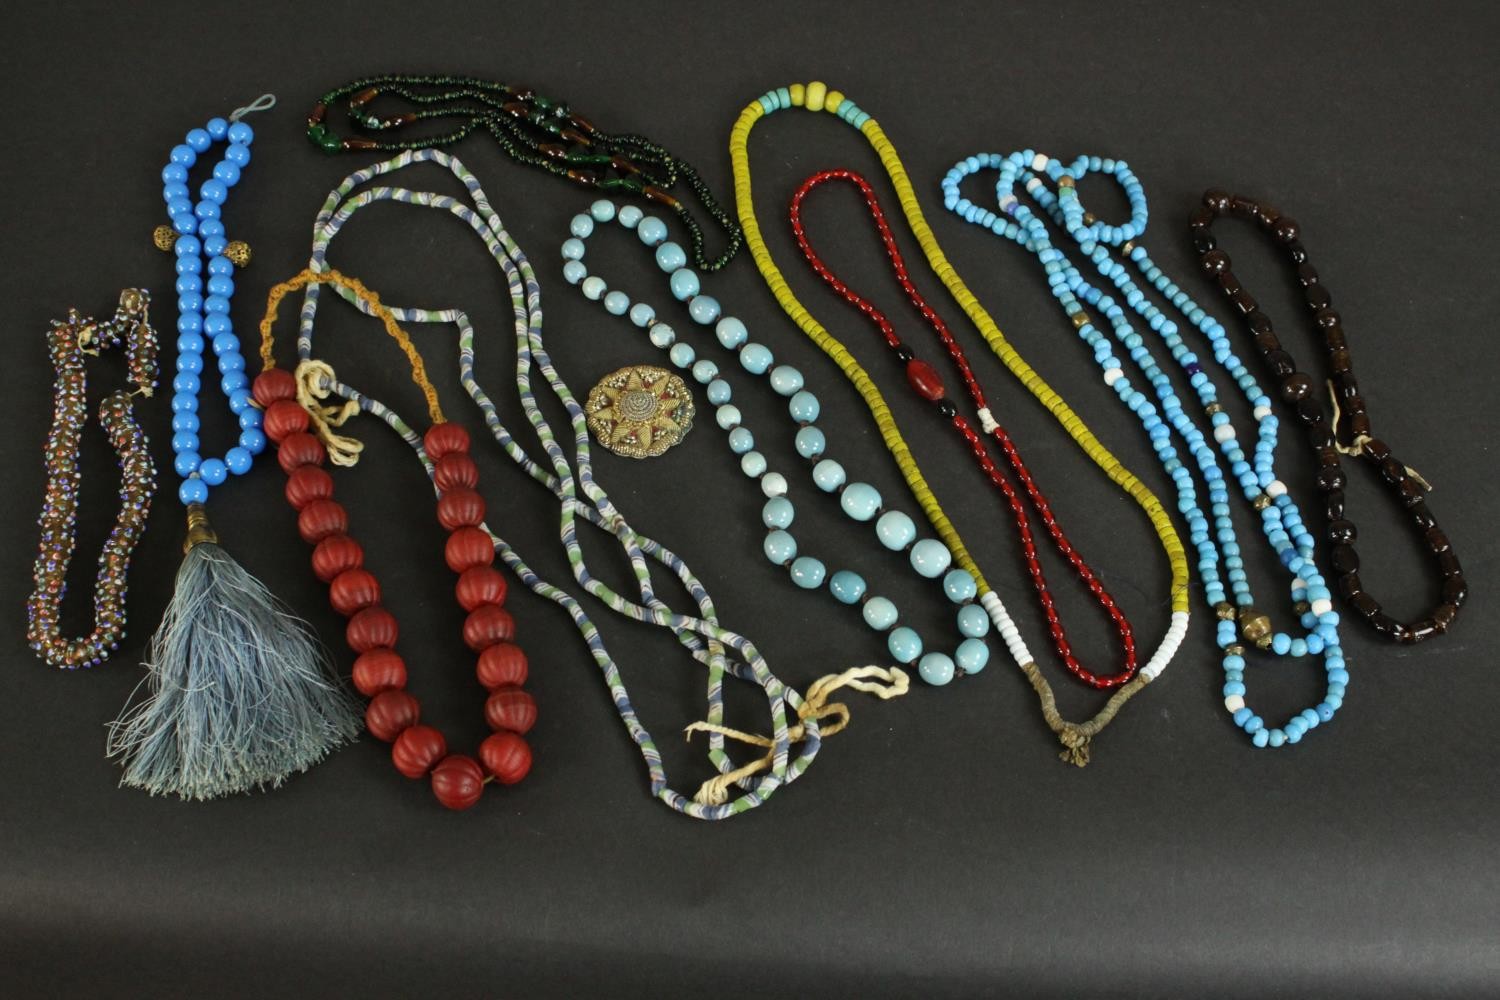 A collection of vintage and African glass trade beads and necklaces, including early 20th century